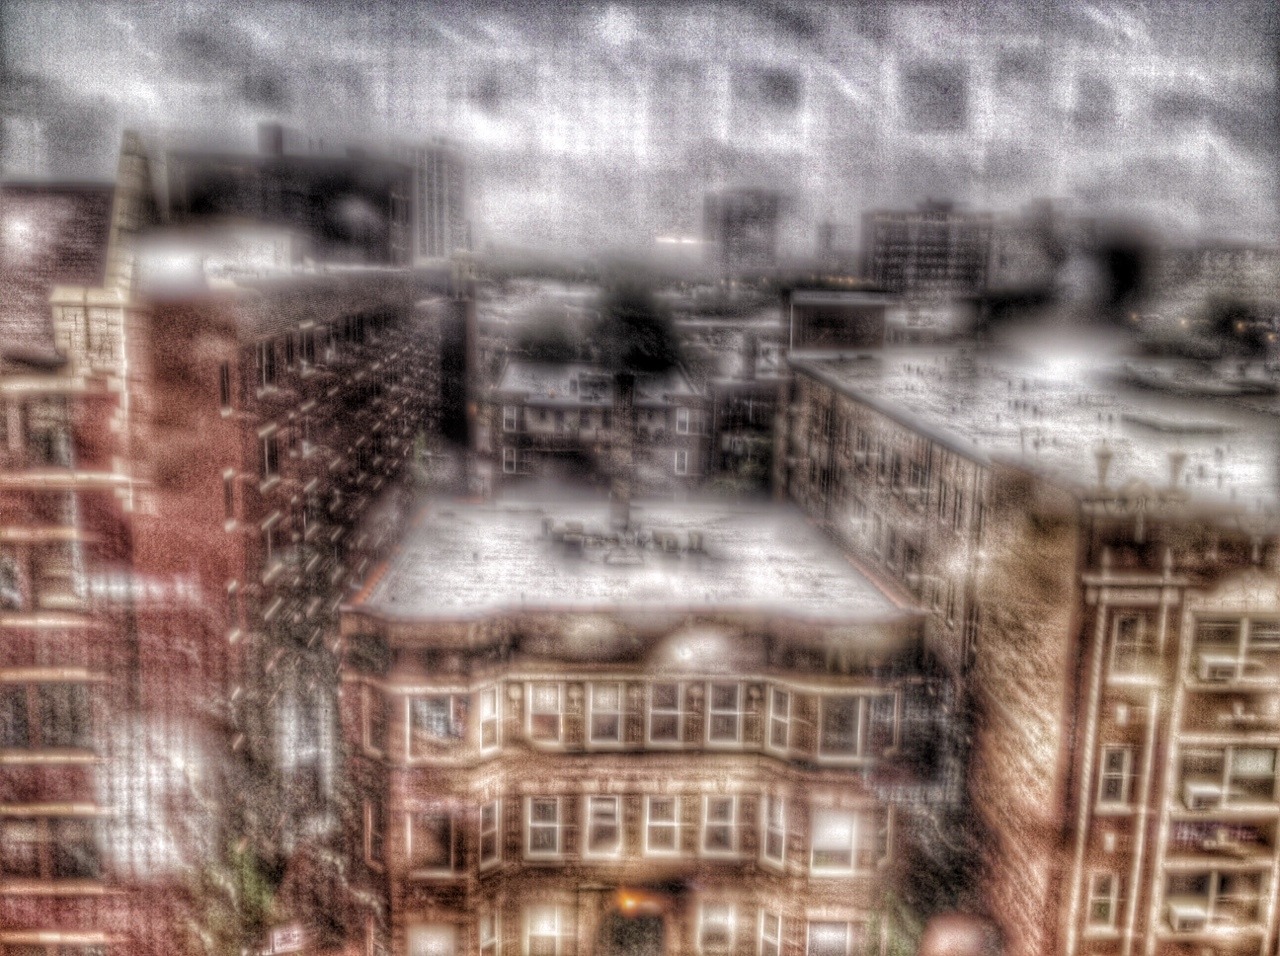 A view out my front window as heavy rain passed - August 2014 - Chicago, IL